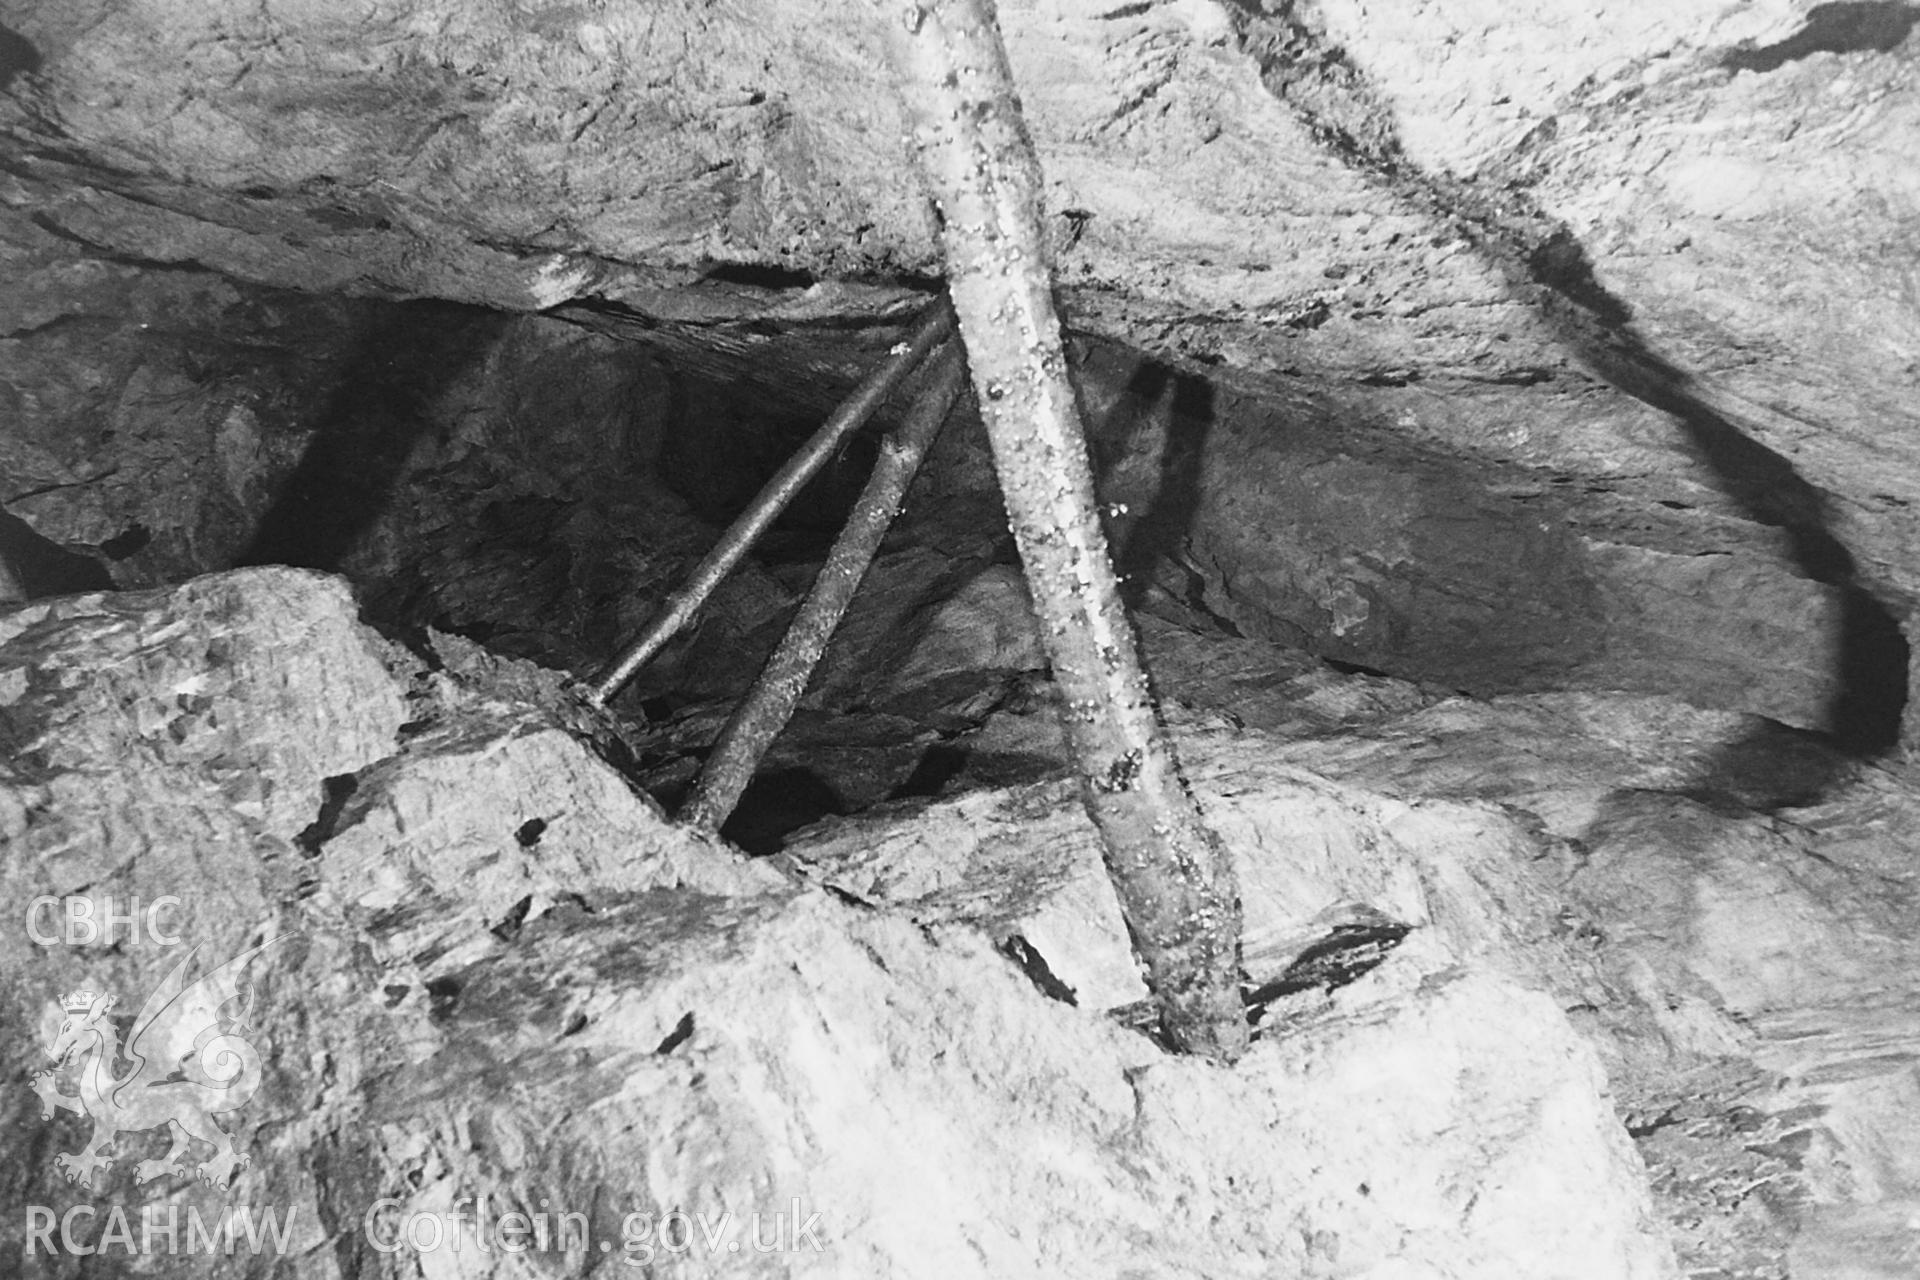 Black and white photo showing view of Llangunnor Lead Mines, taken by Paul R. Davis, 1984.